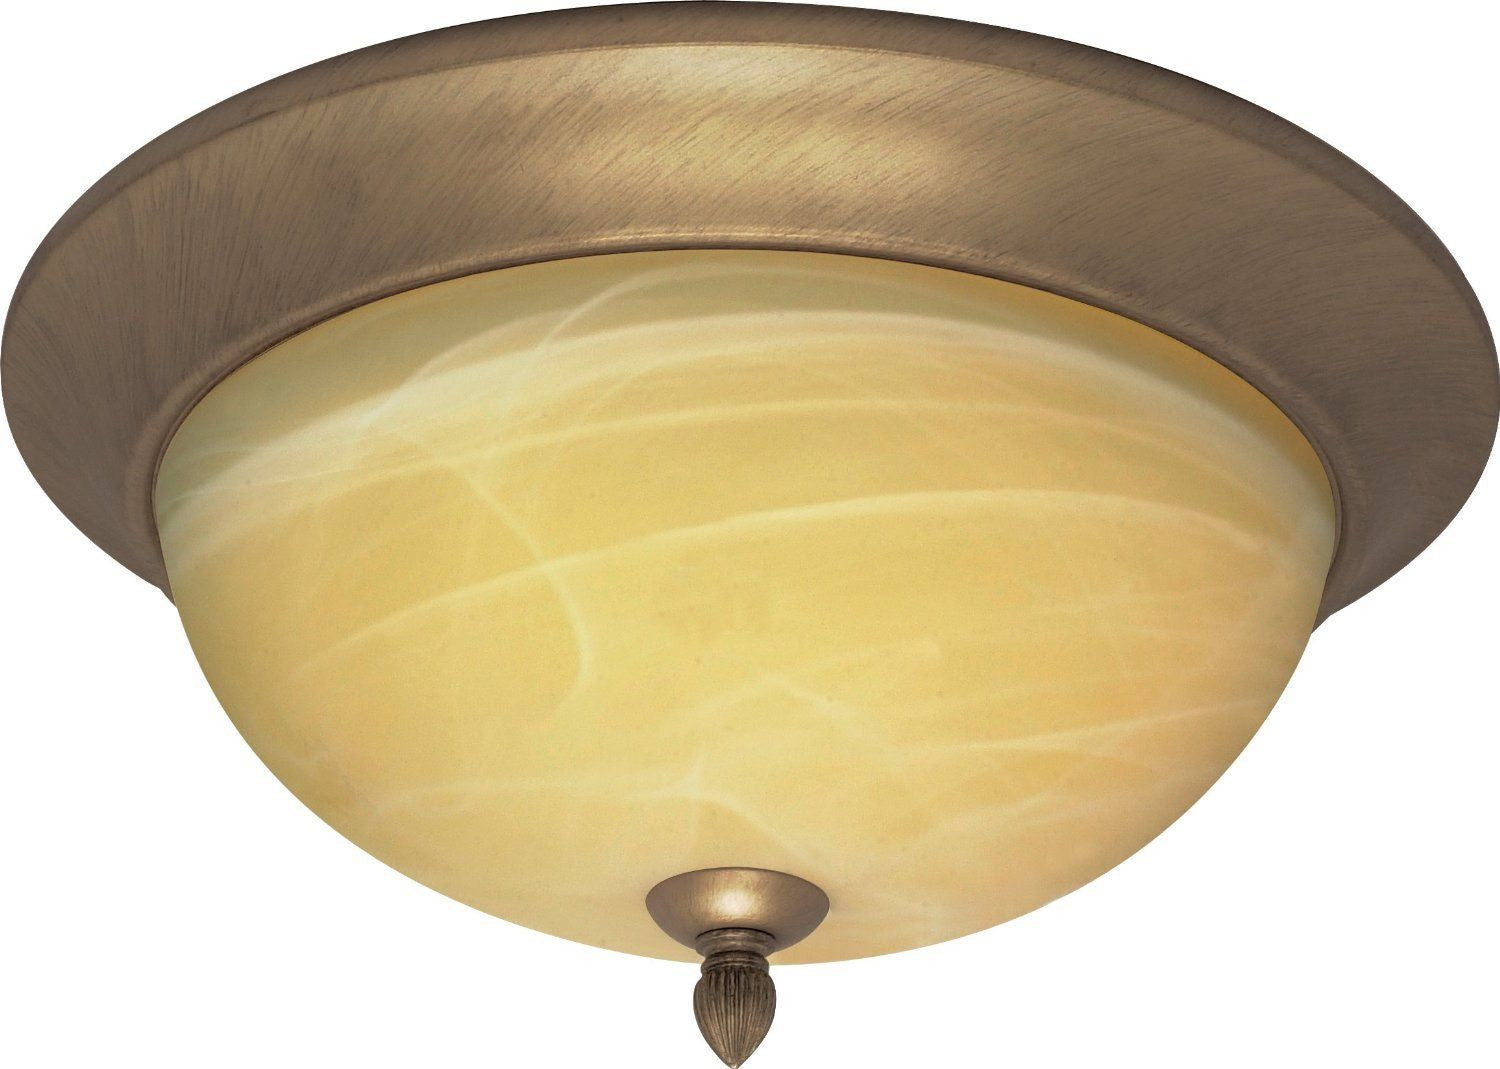 Nuvo Lighting 60-146 Vanguard Collection Three Light Flush Ceiling Mount in Flemish Gold Finish